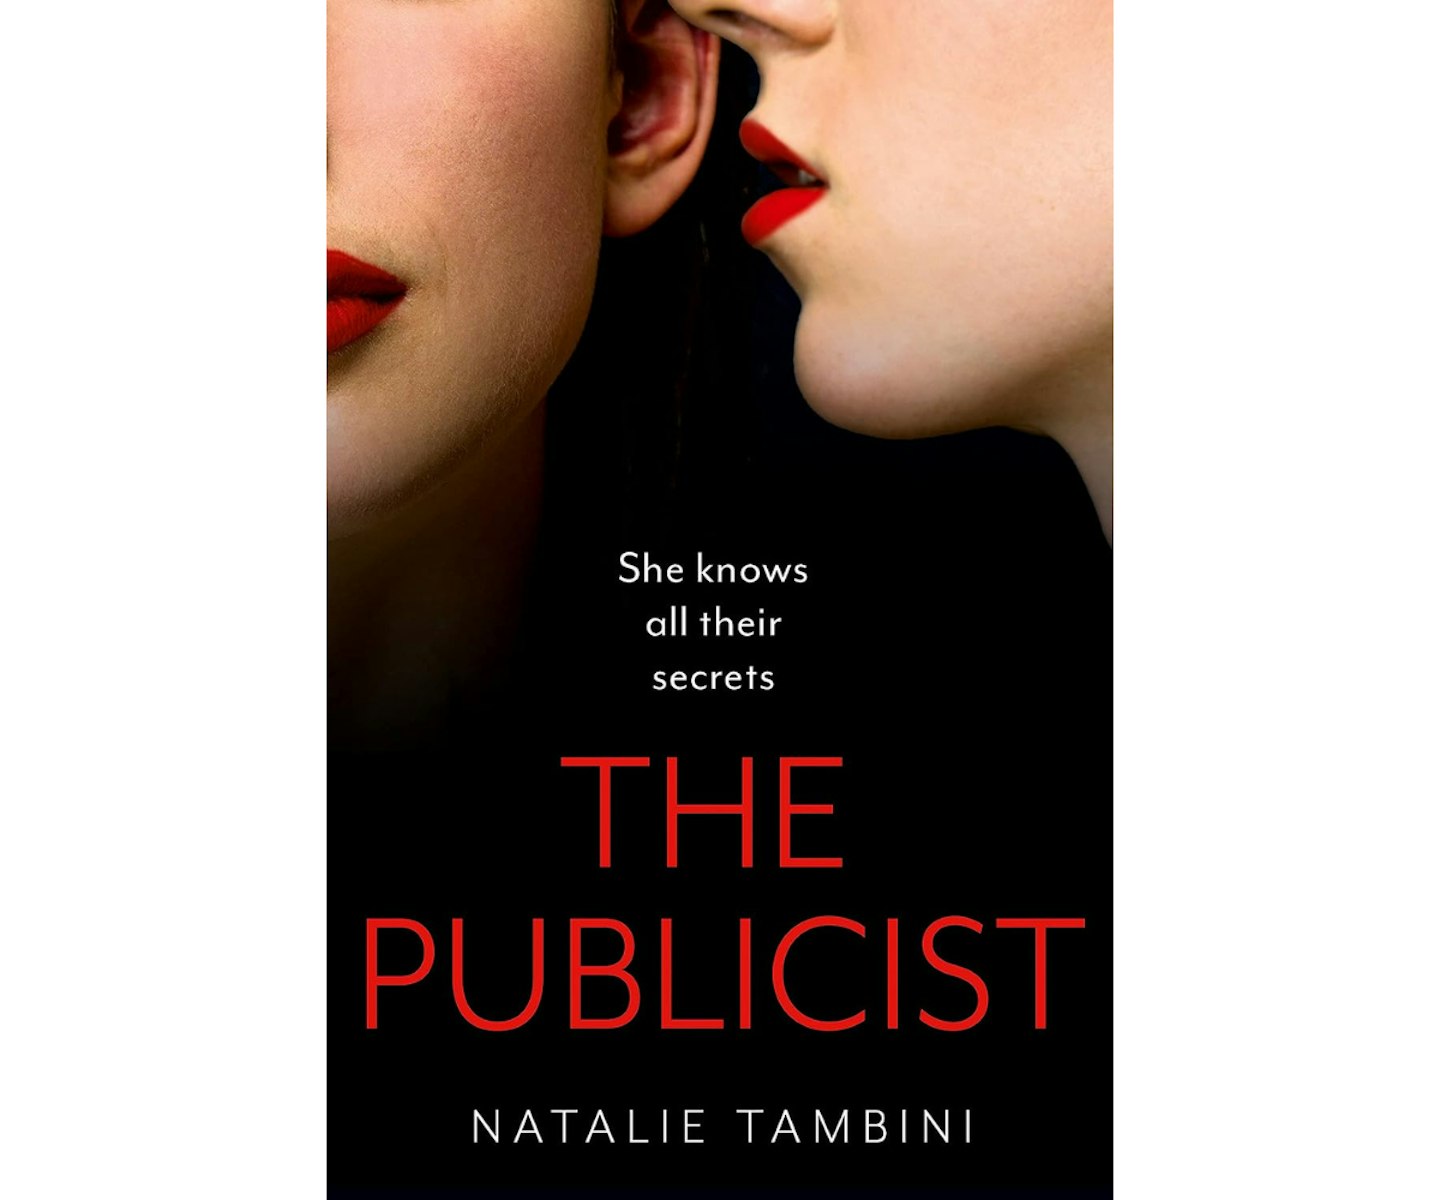 The Publicist by Natalie Tambini